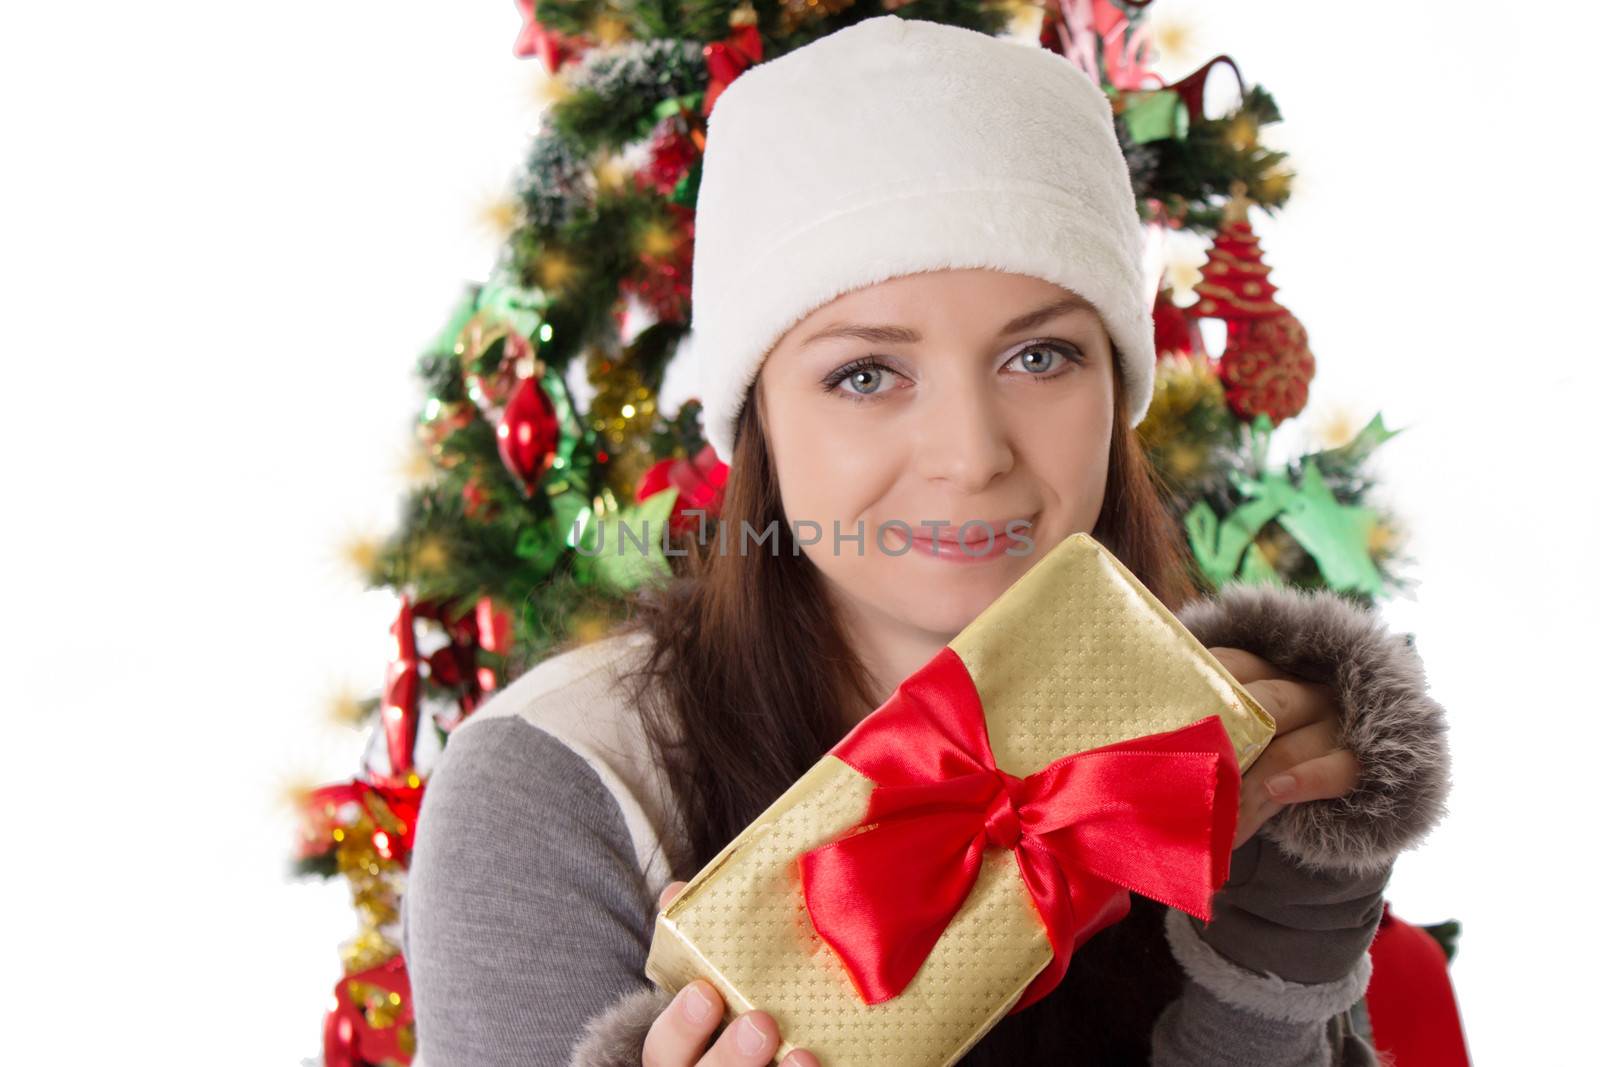 Smiling woman in fur hat and mitten holding Christmas present